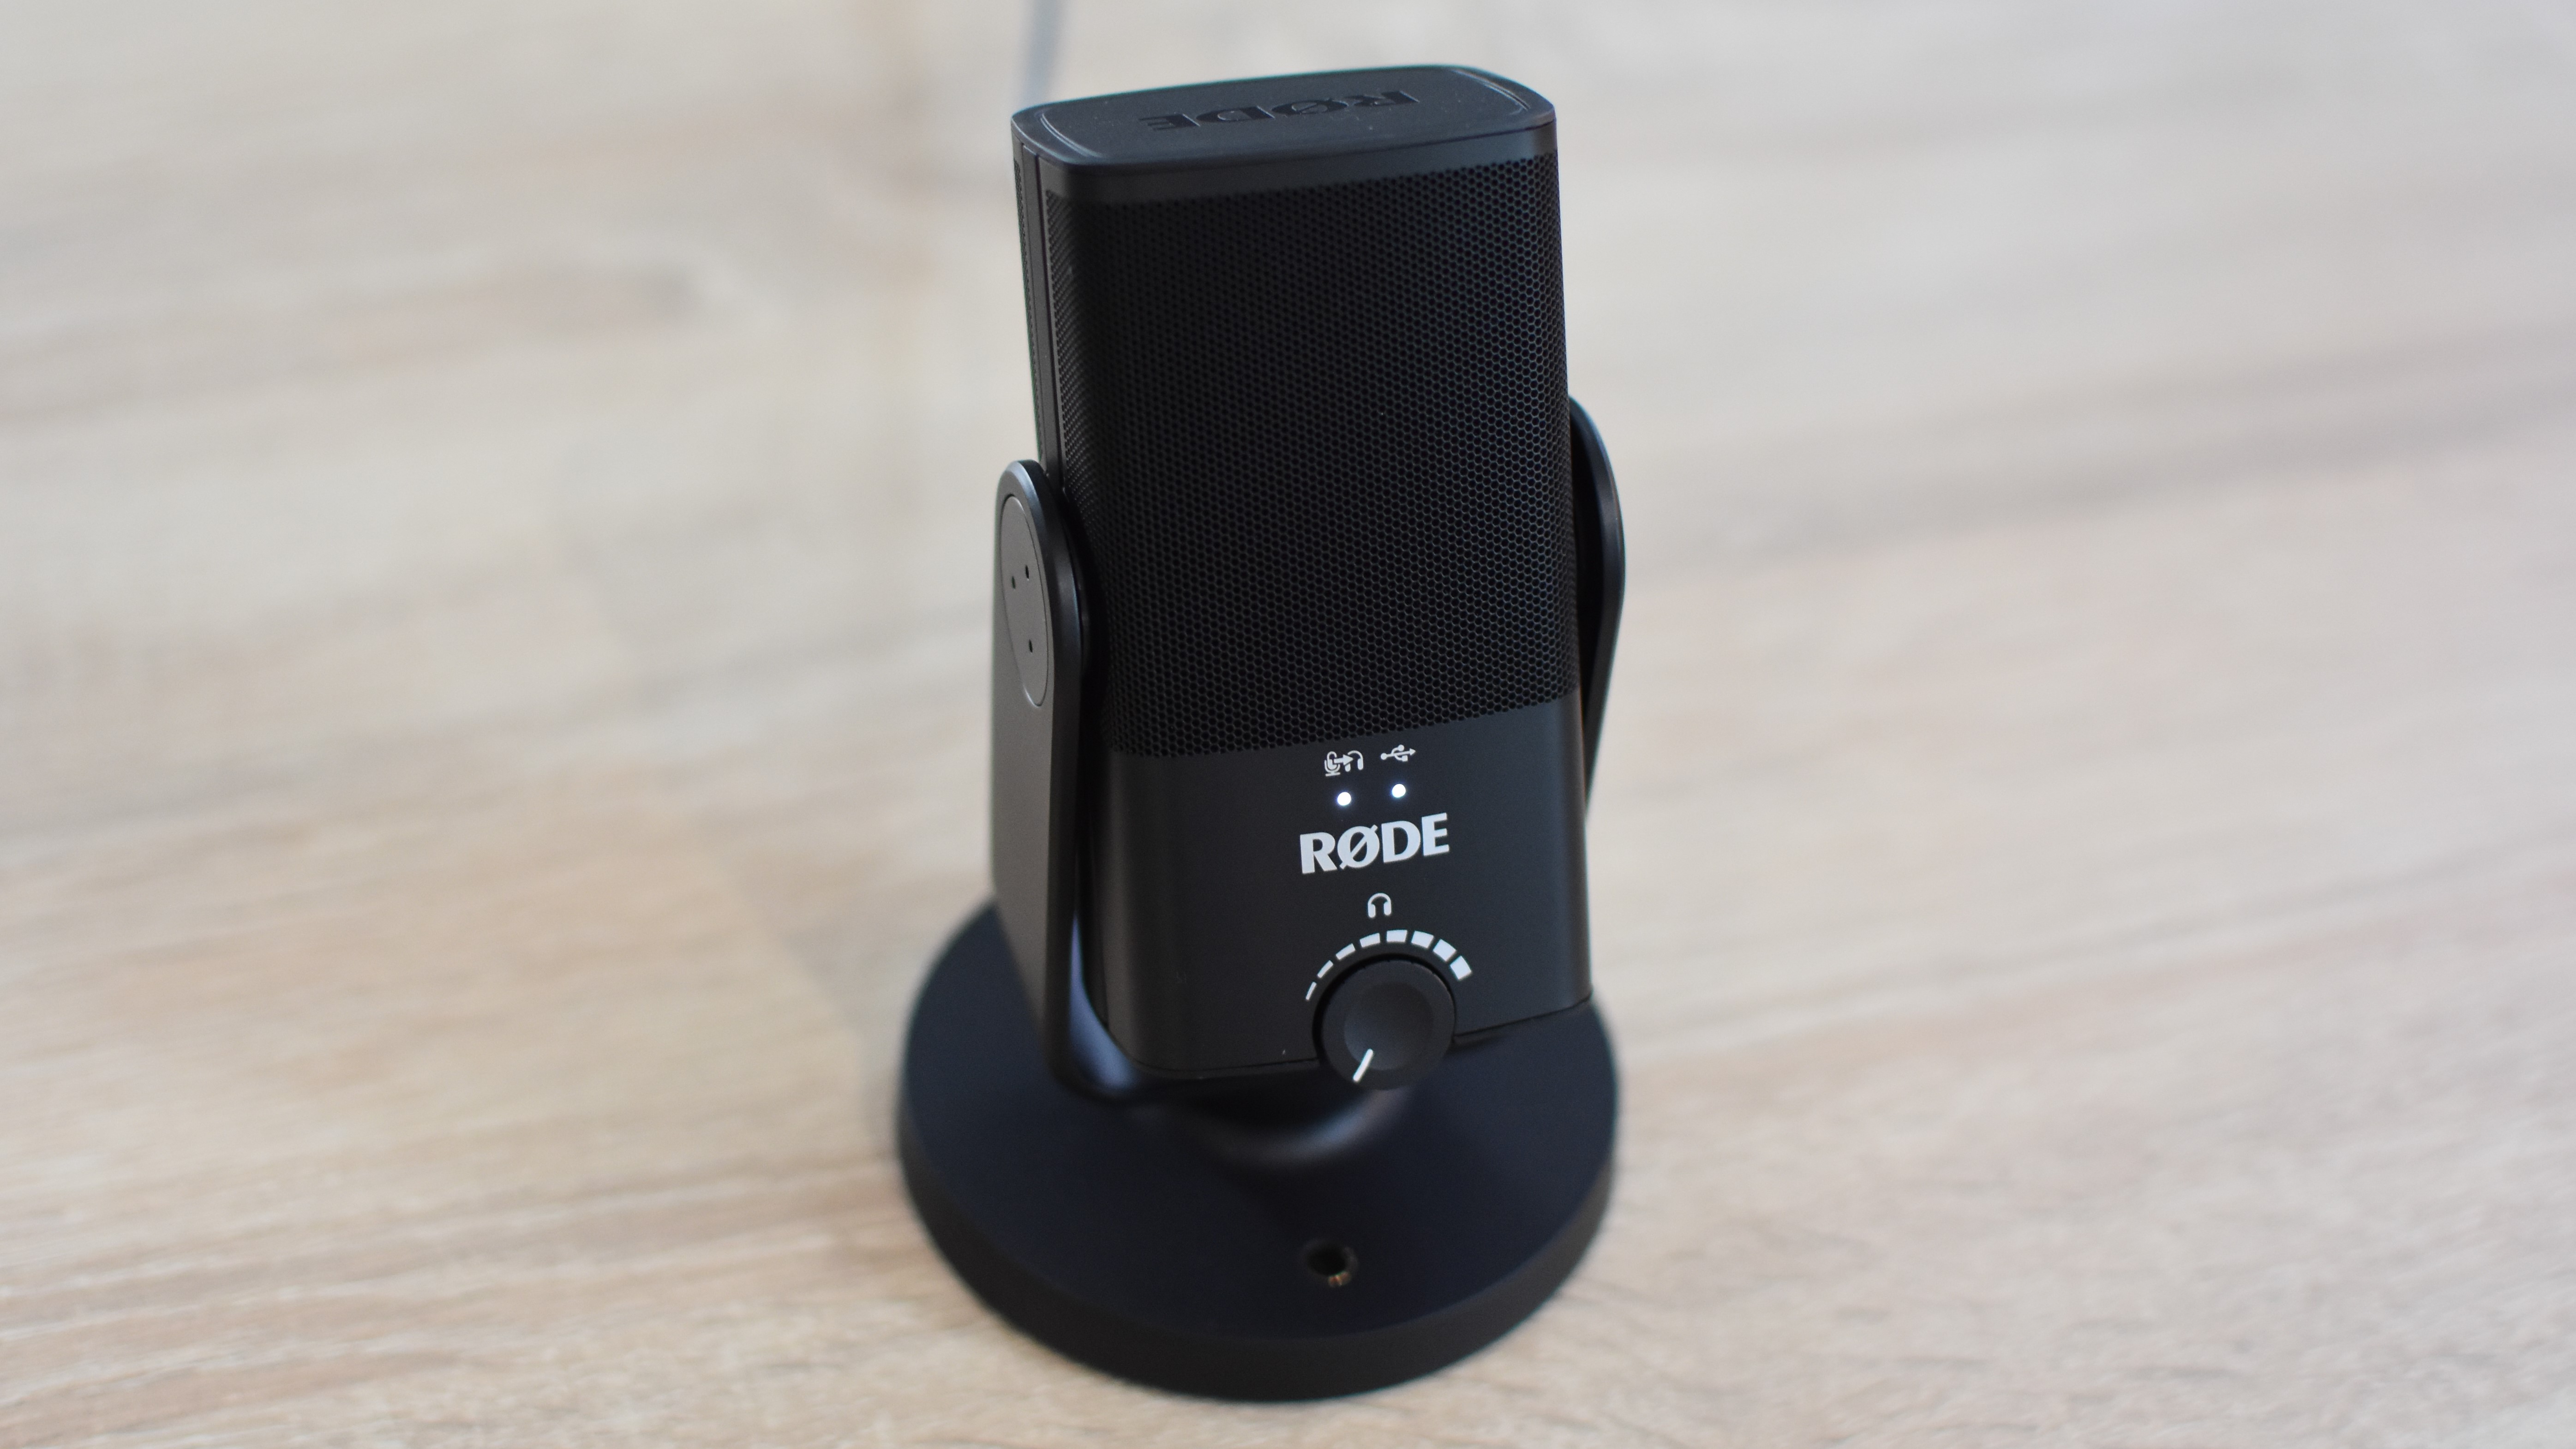 The Rode NT-USB Mini microphone on a desk.